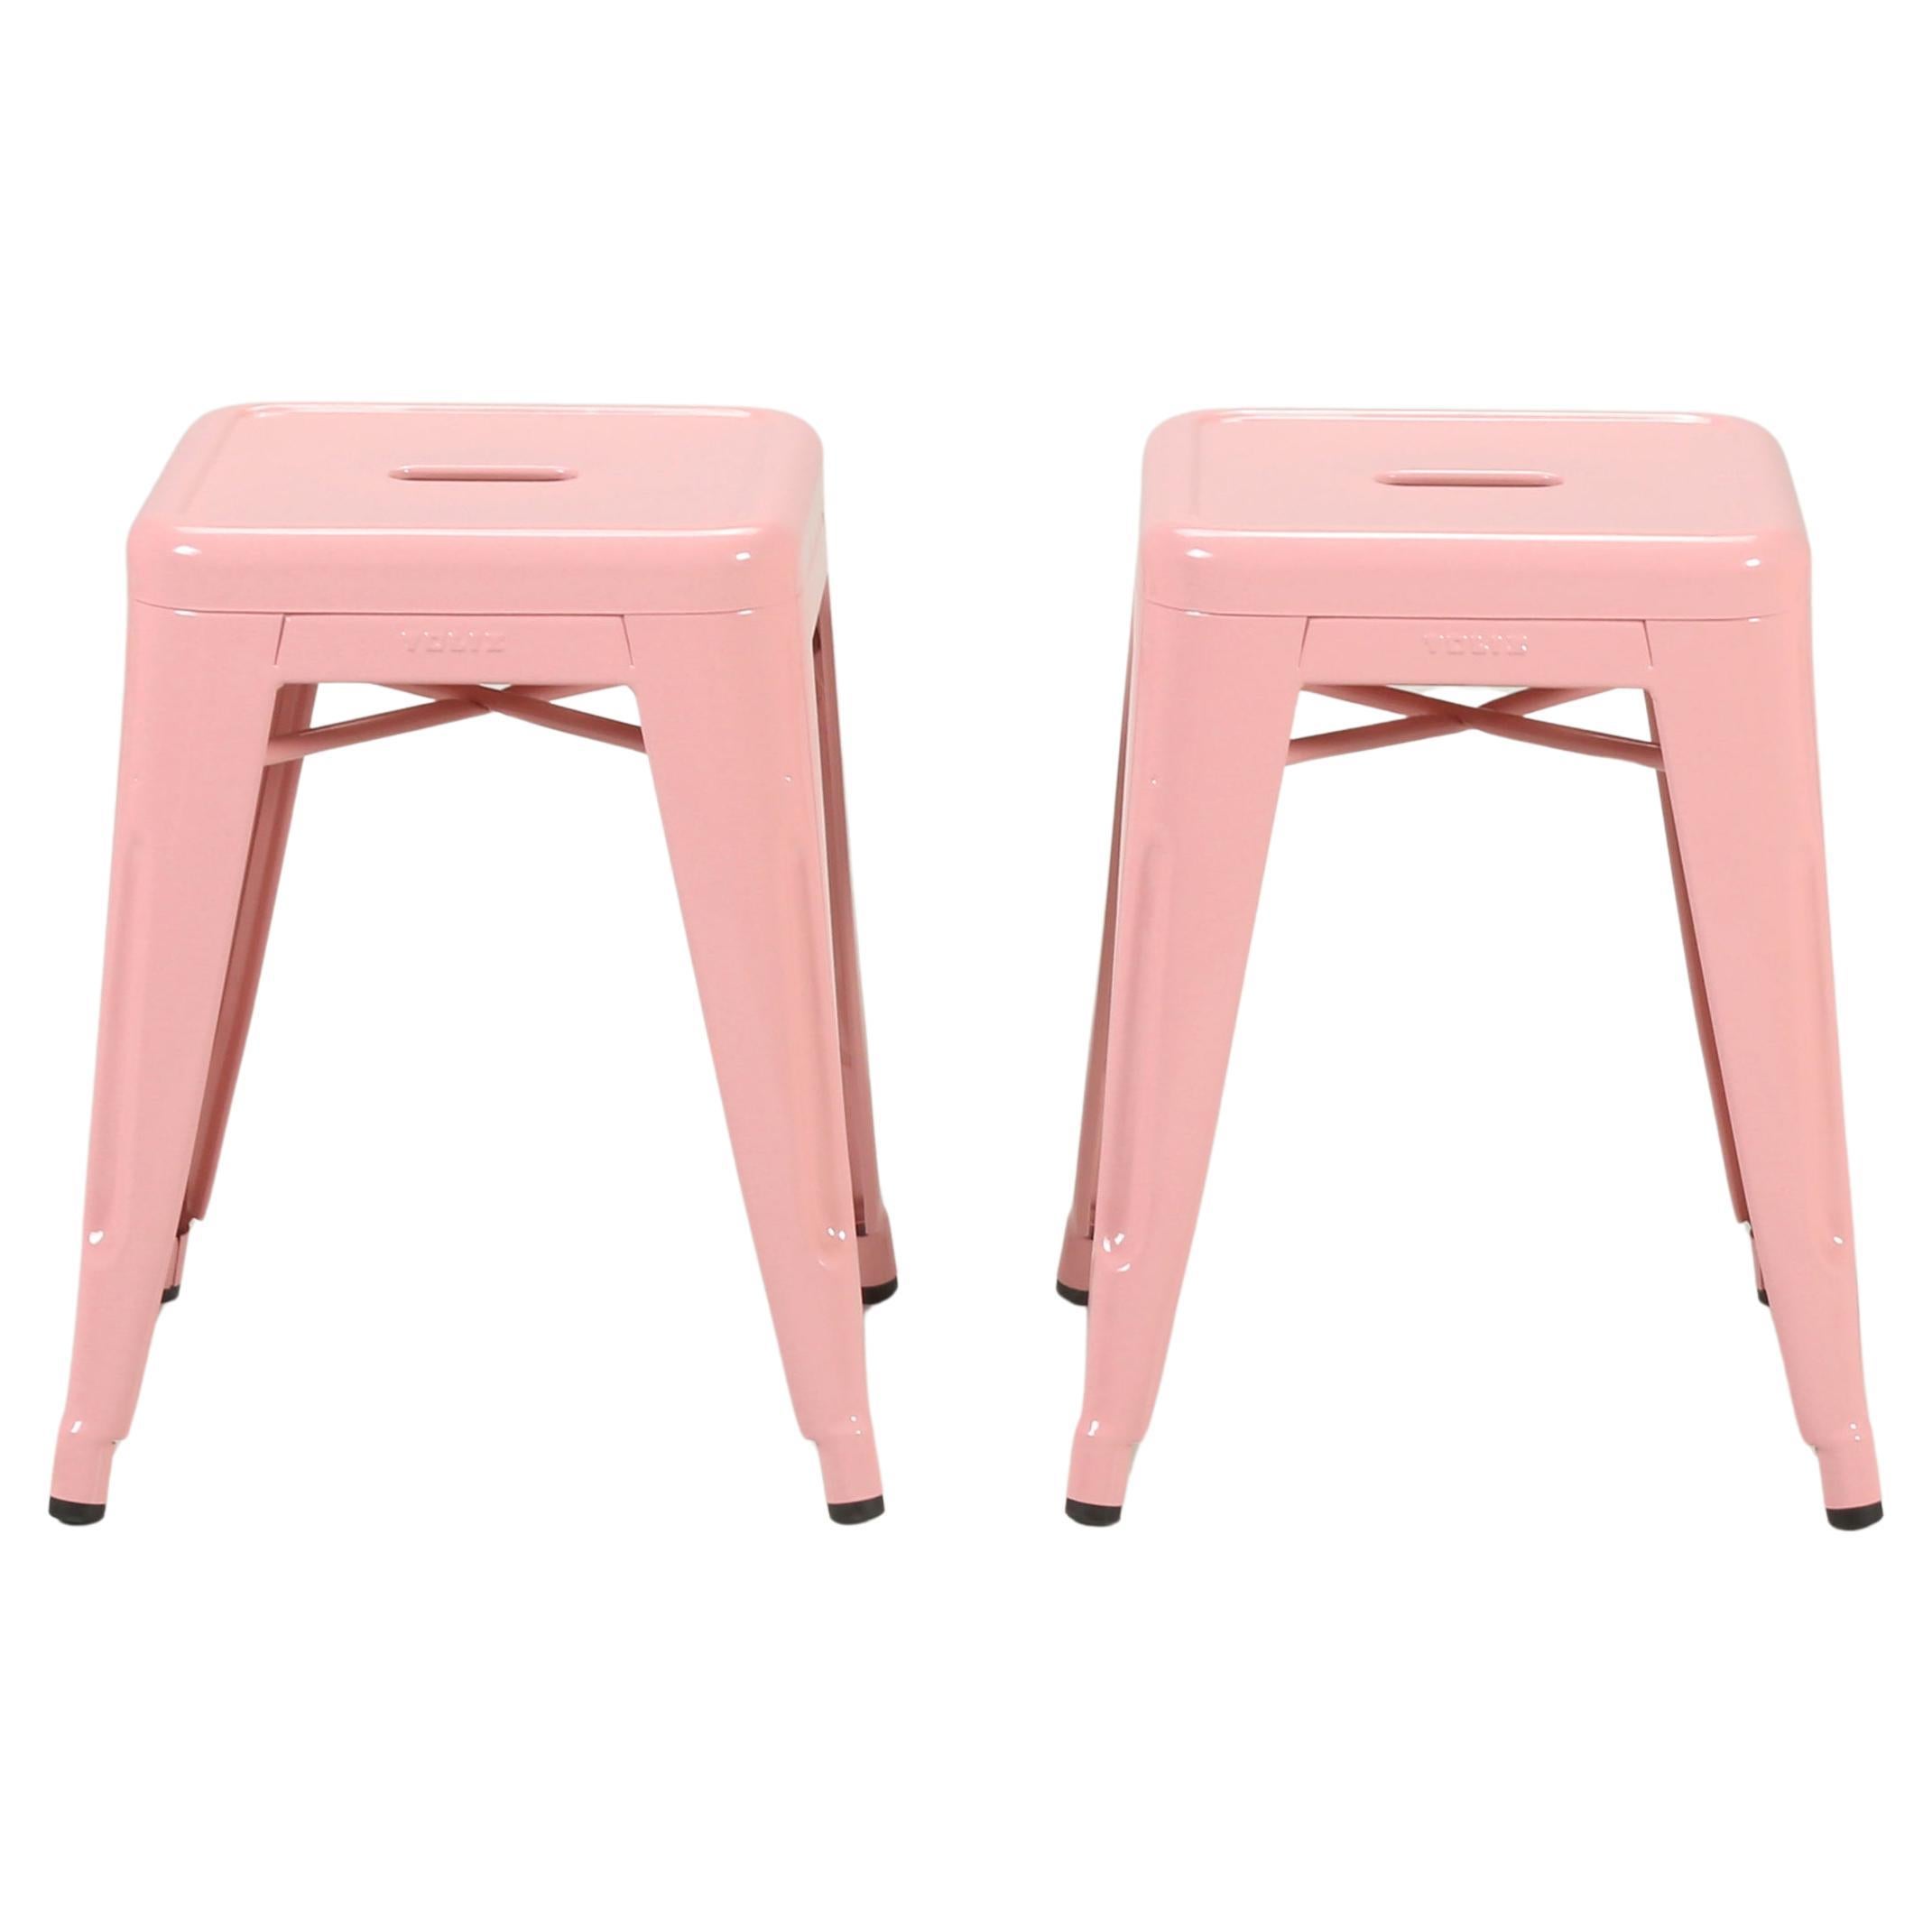 Tolix French Made Stacking Stools, Set of (2) Over (1000) Pieces in Stock